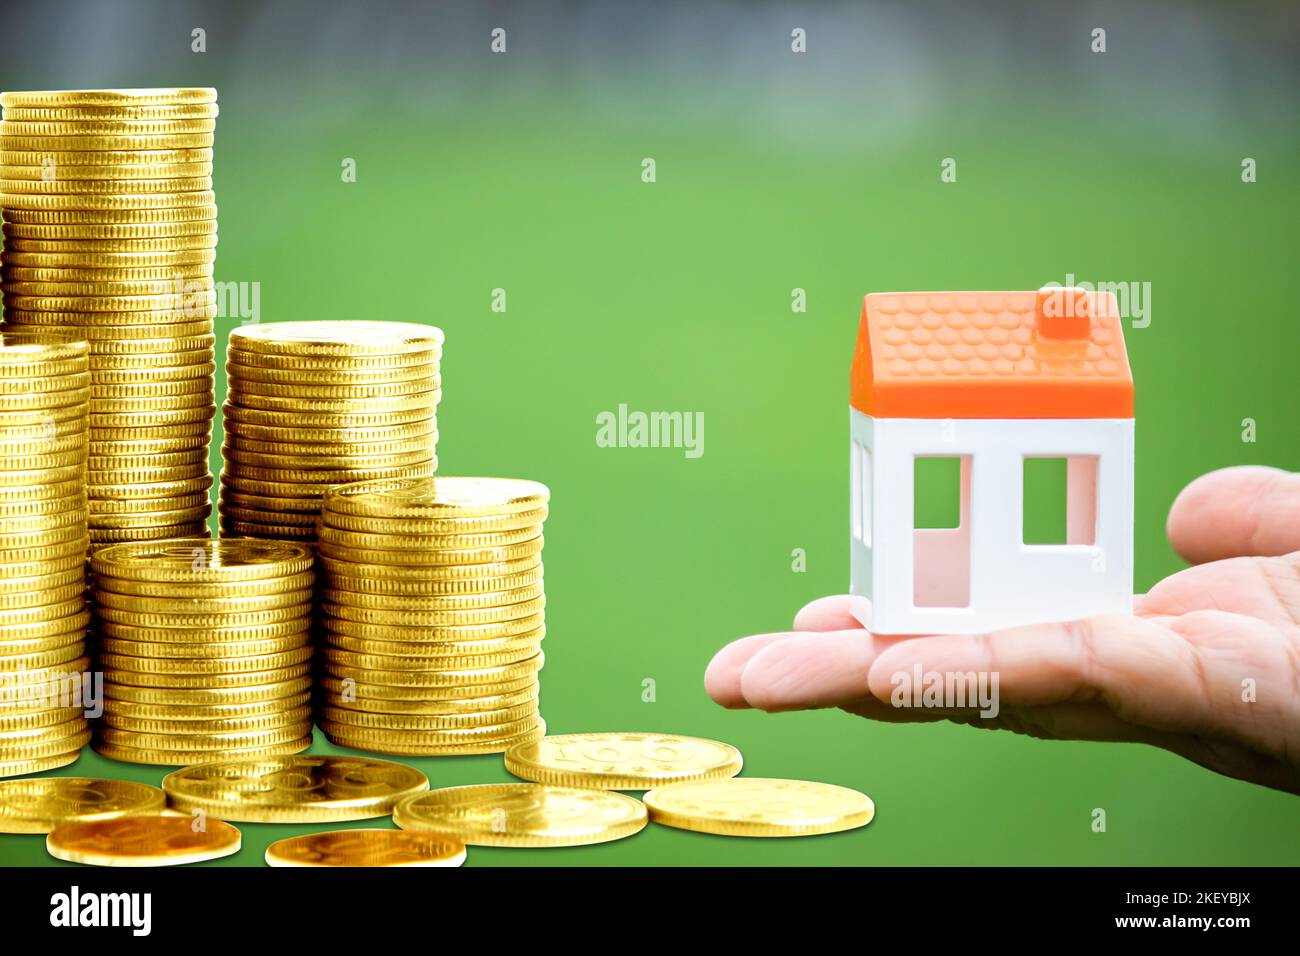 Idea concept of saving money to buy house. Stacked coins and figure of house in one's hand isolated on green background. Real estate value increase. Stock Photo